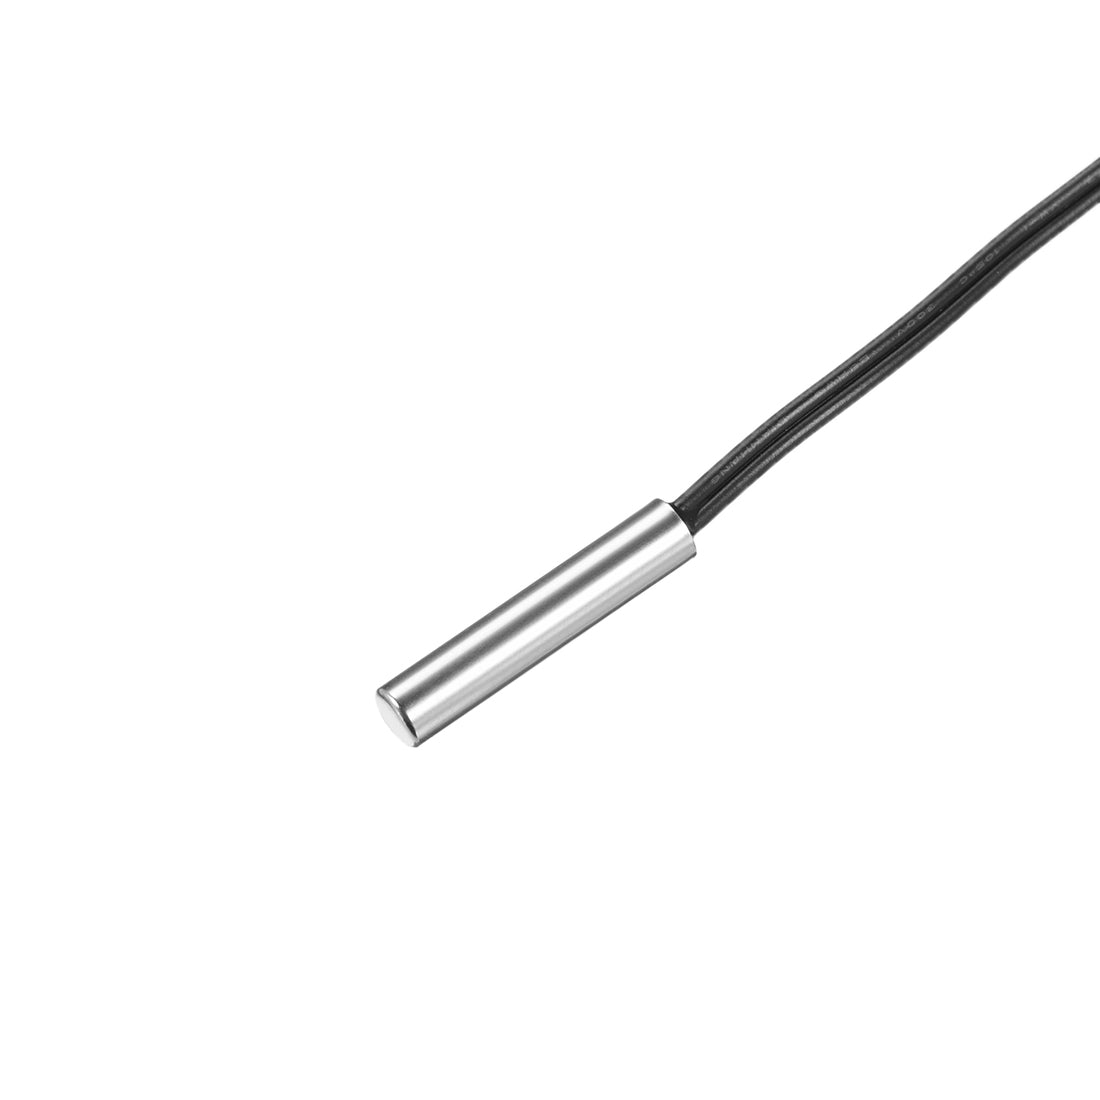 uxcell Uxcell 50K NTC Thermistor Probe 78.7 Inch Stainless Steel Sensitive Temperature Temp Sensor for Air Conditioner